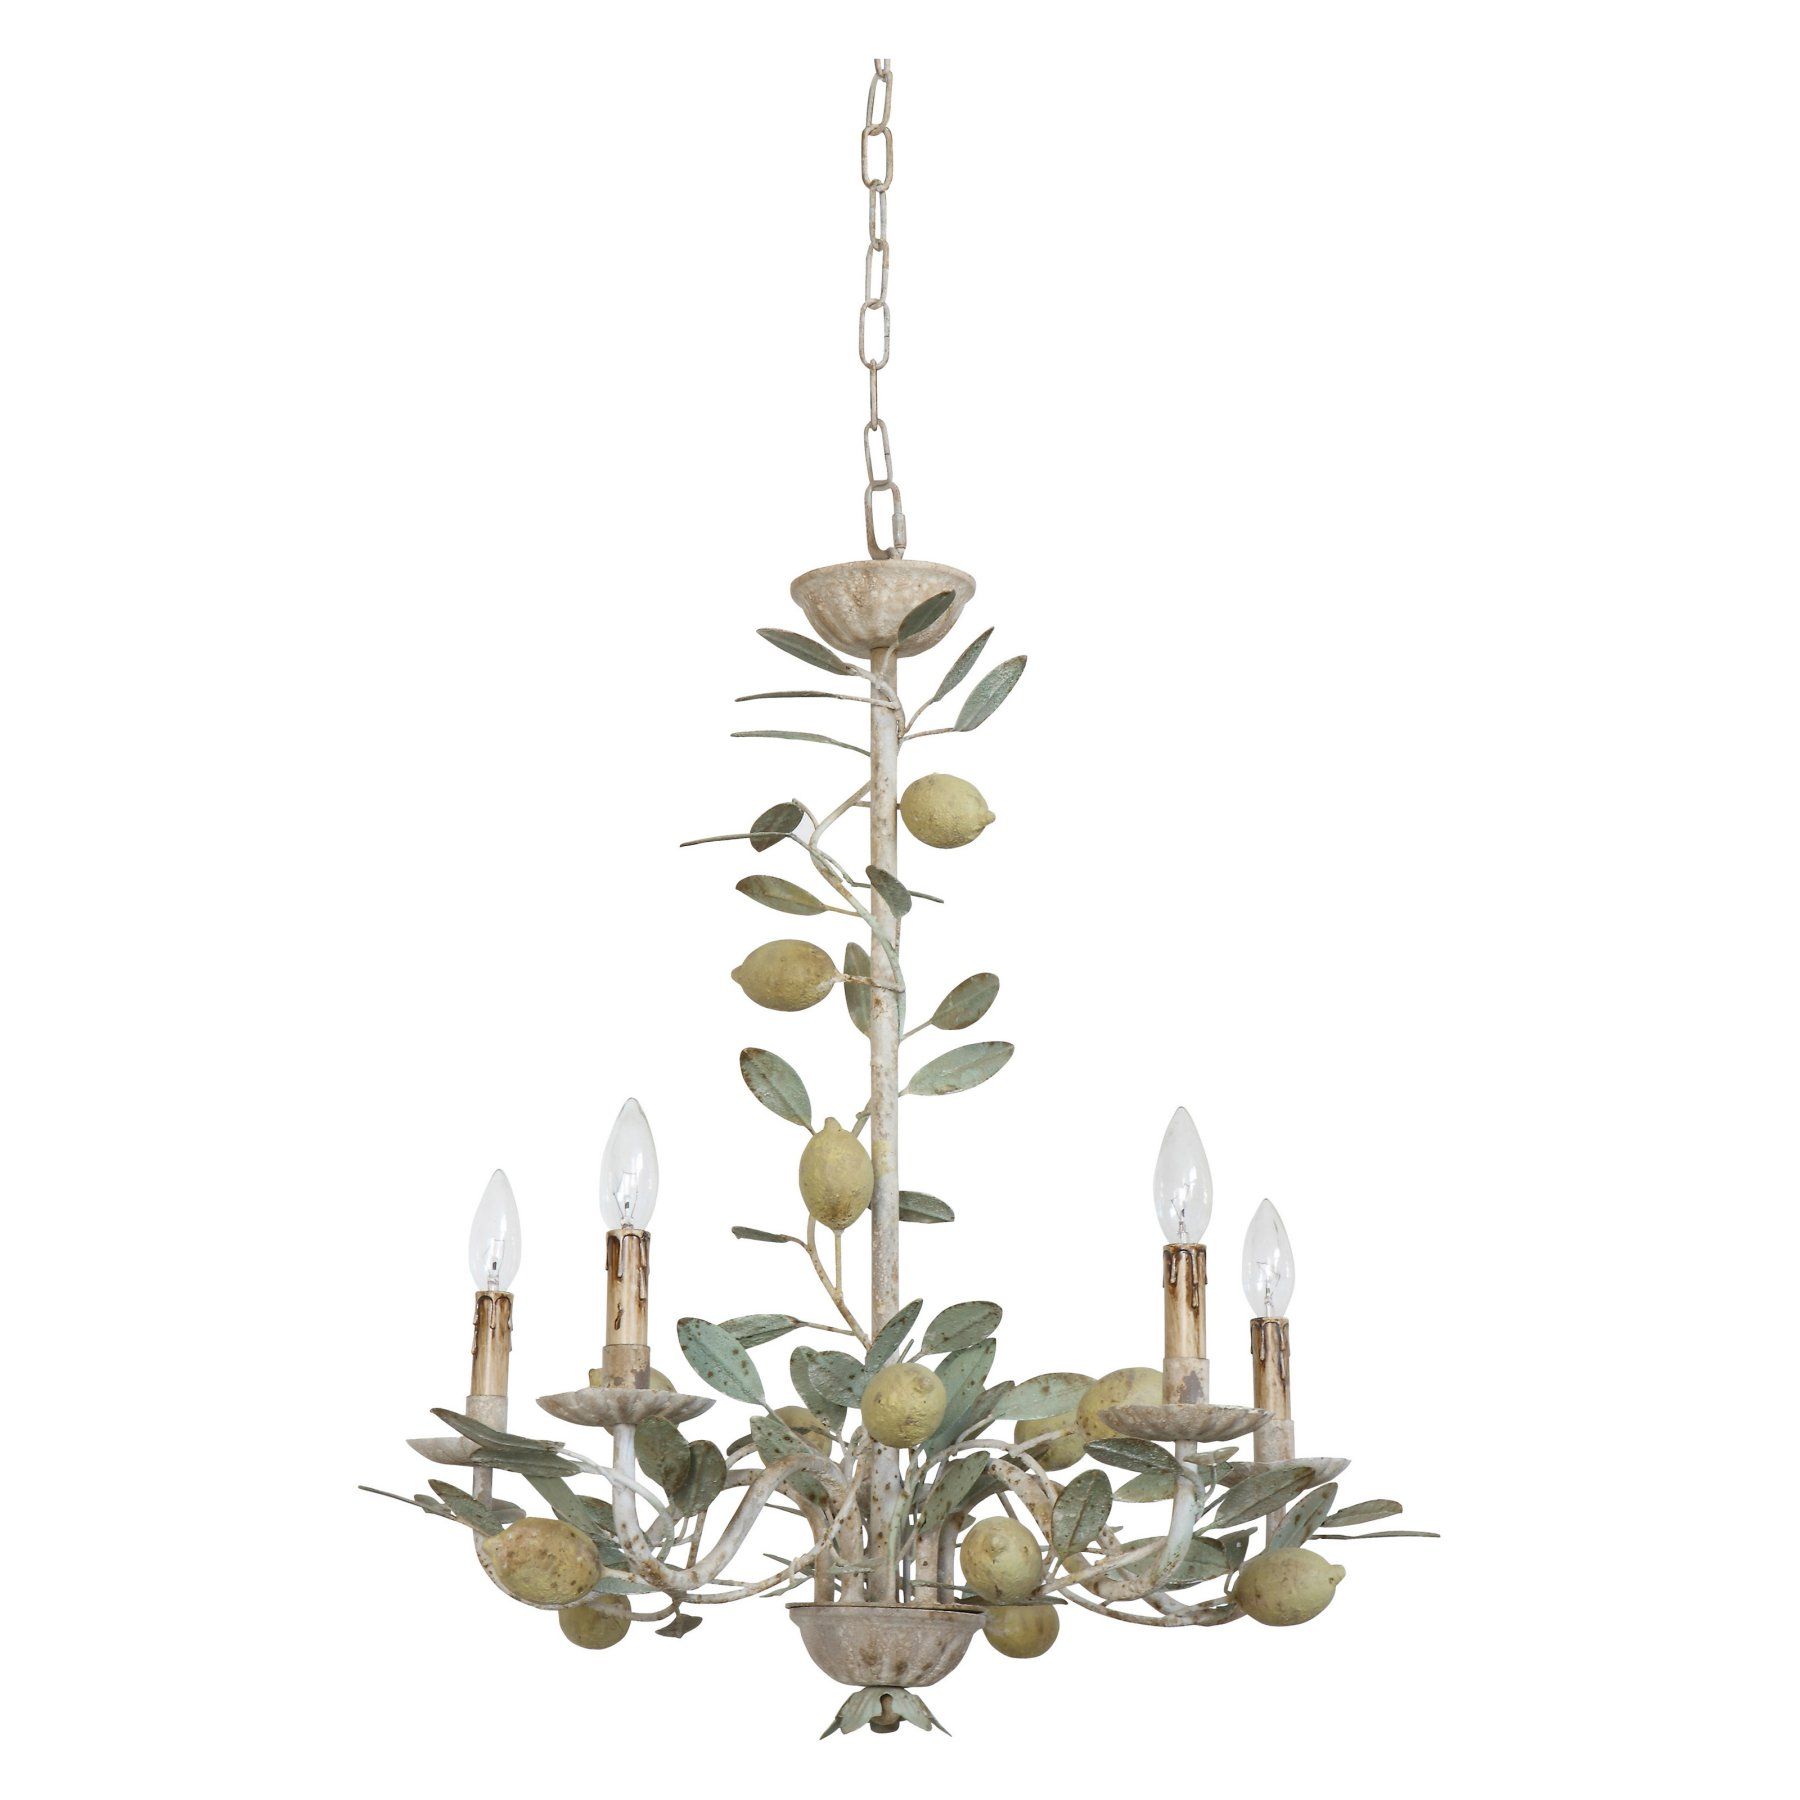 3r Studios Metal Leaf & Lemons Chandelier With 5 Lights Throughout Florentina 5 Light Candle Style Chandeliers (View 29 of 30)